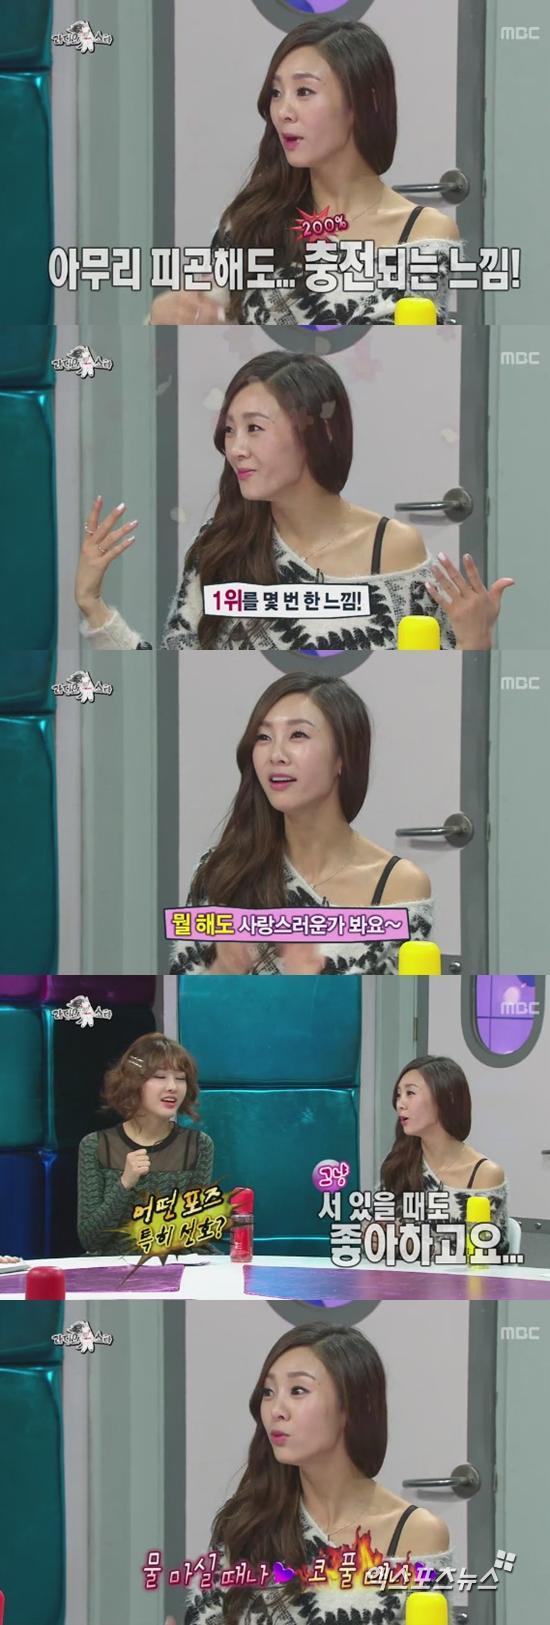 G.NA loves performing for the military?